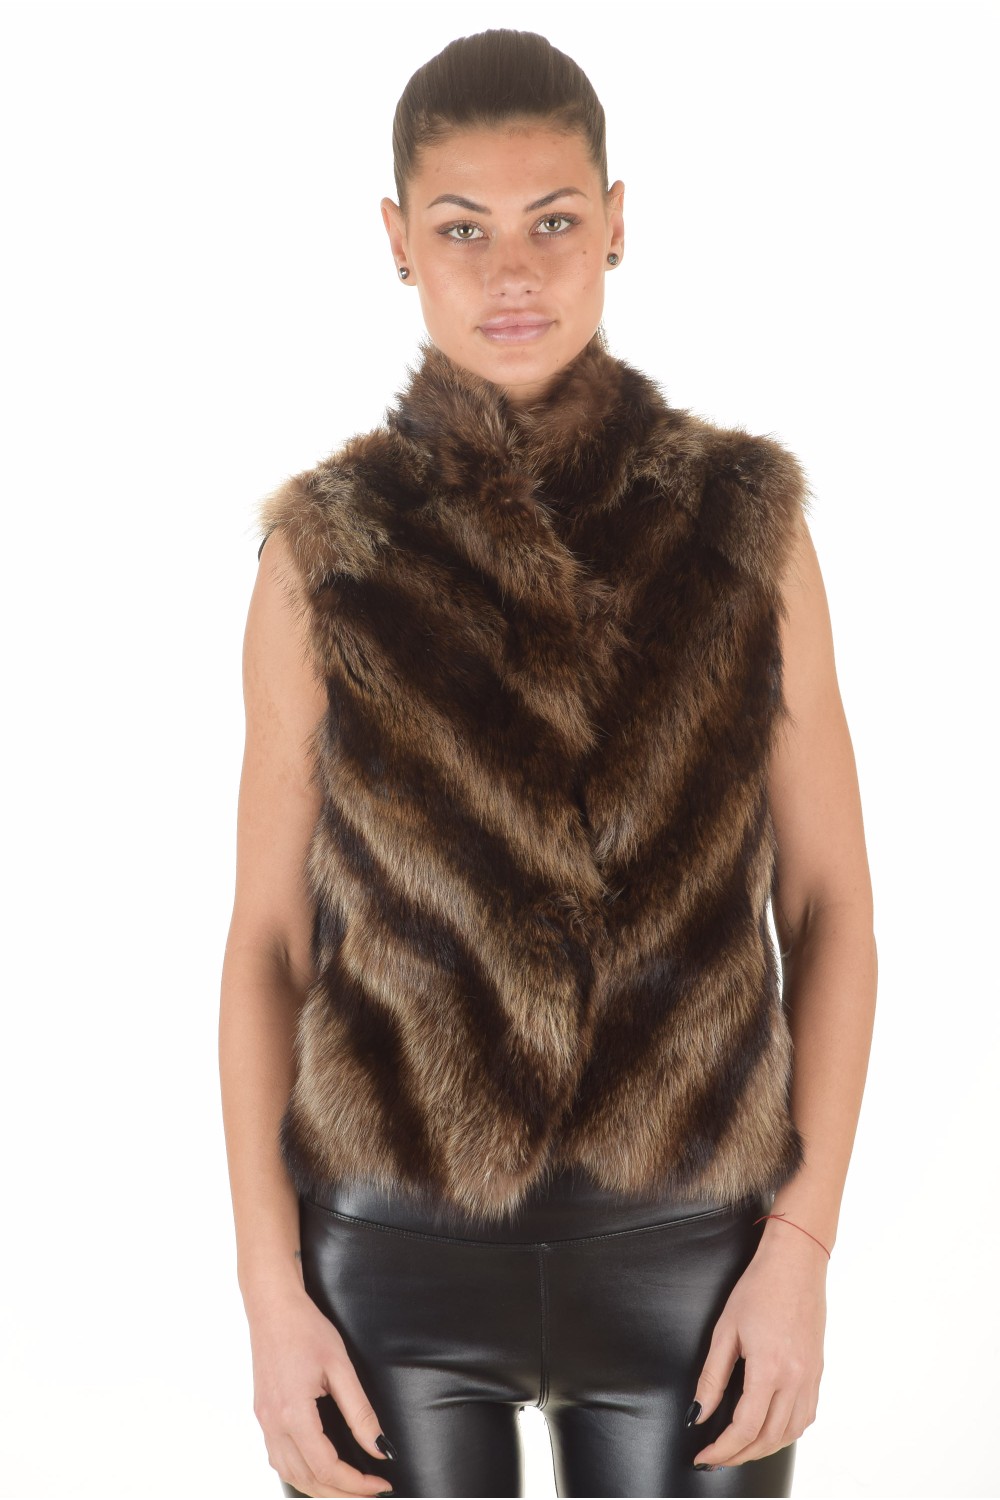 base in the middle of nowhere sick Vestă dе blana naturala | furlando - leather and fur.